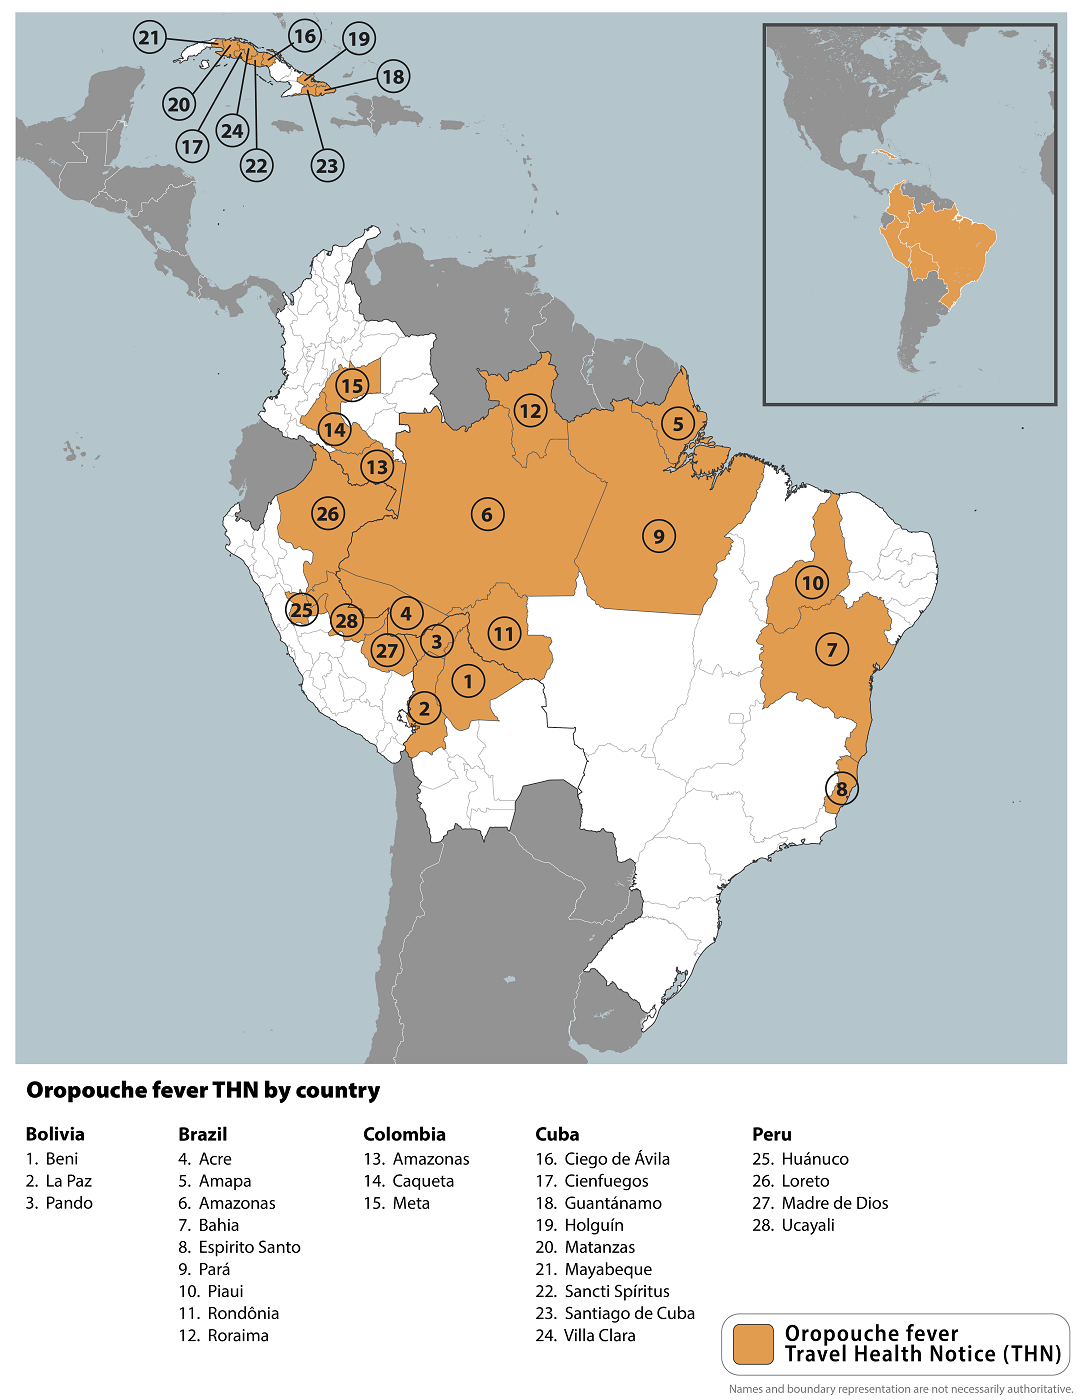 Areas of Brazil, Bolivia, Peru, Colombia, and Cuba with outbreaks of Oropouche fever